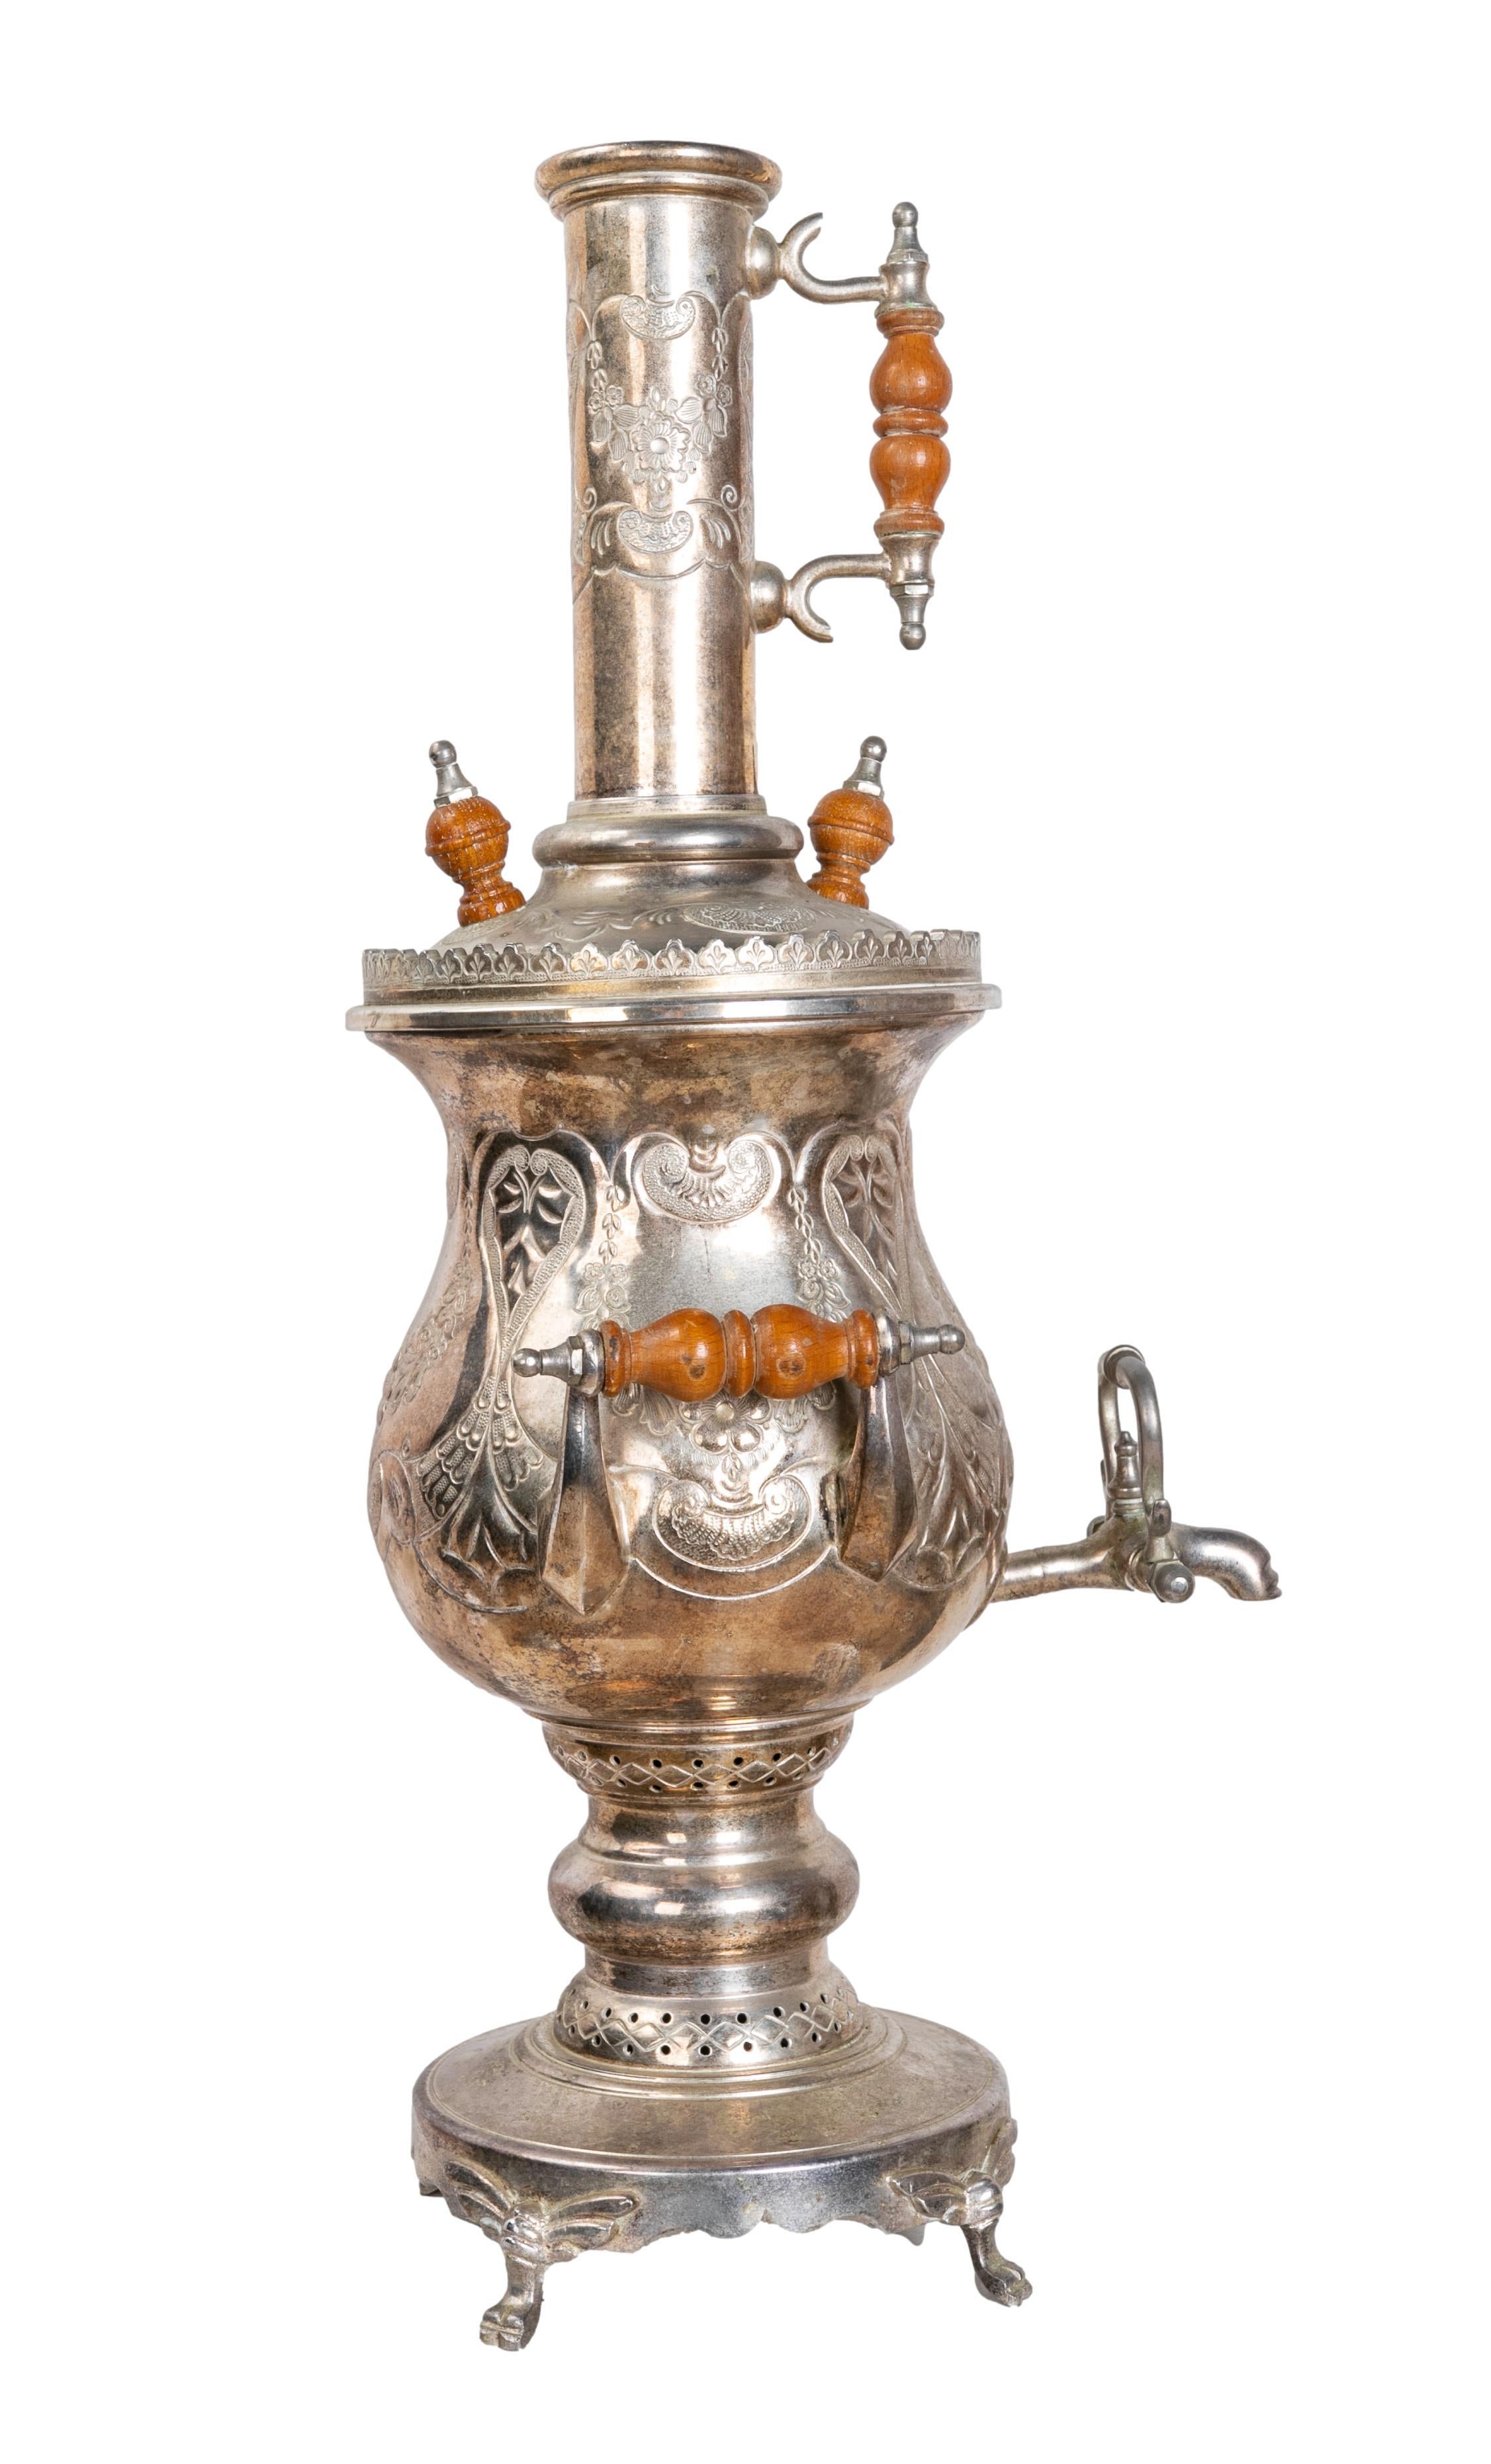 1980s Moroccan Silver-Plated Metal Samovar with Wooden Handles.